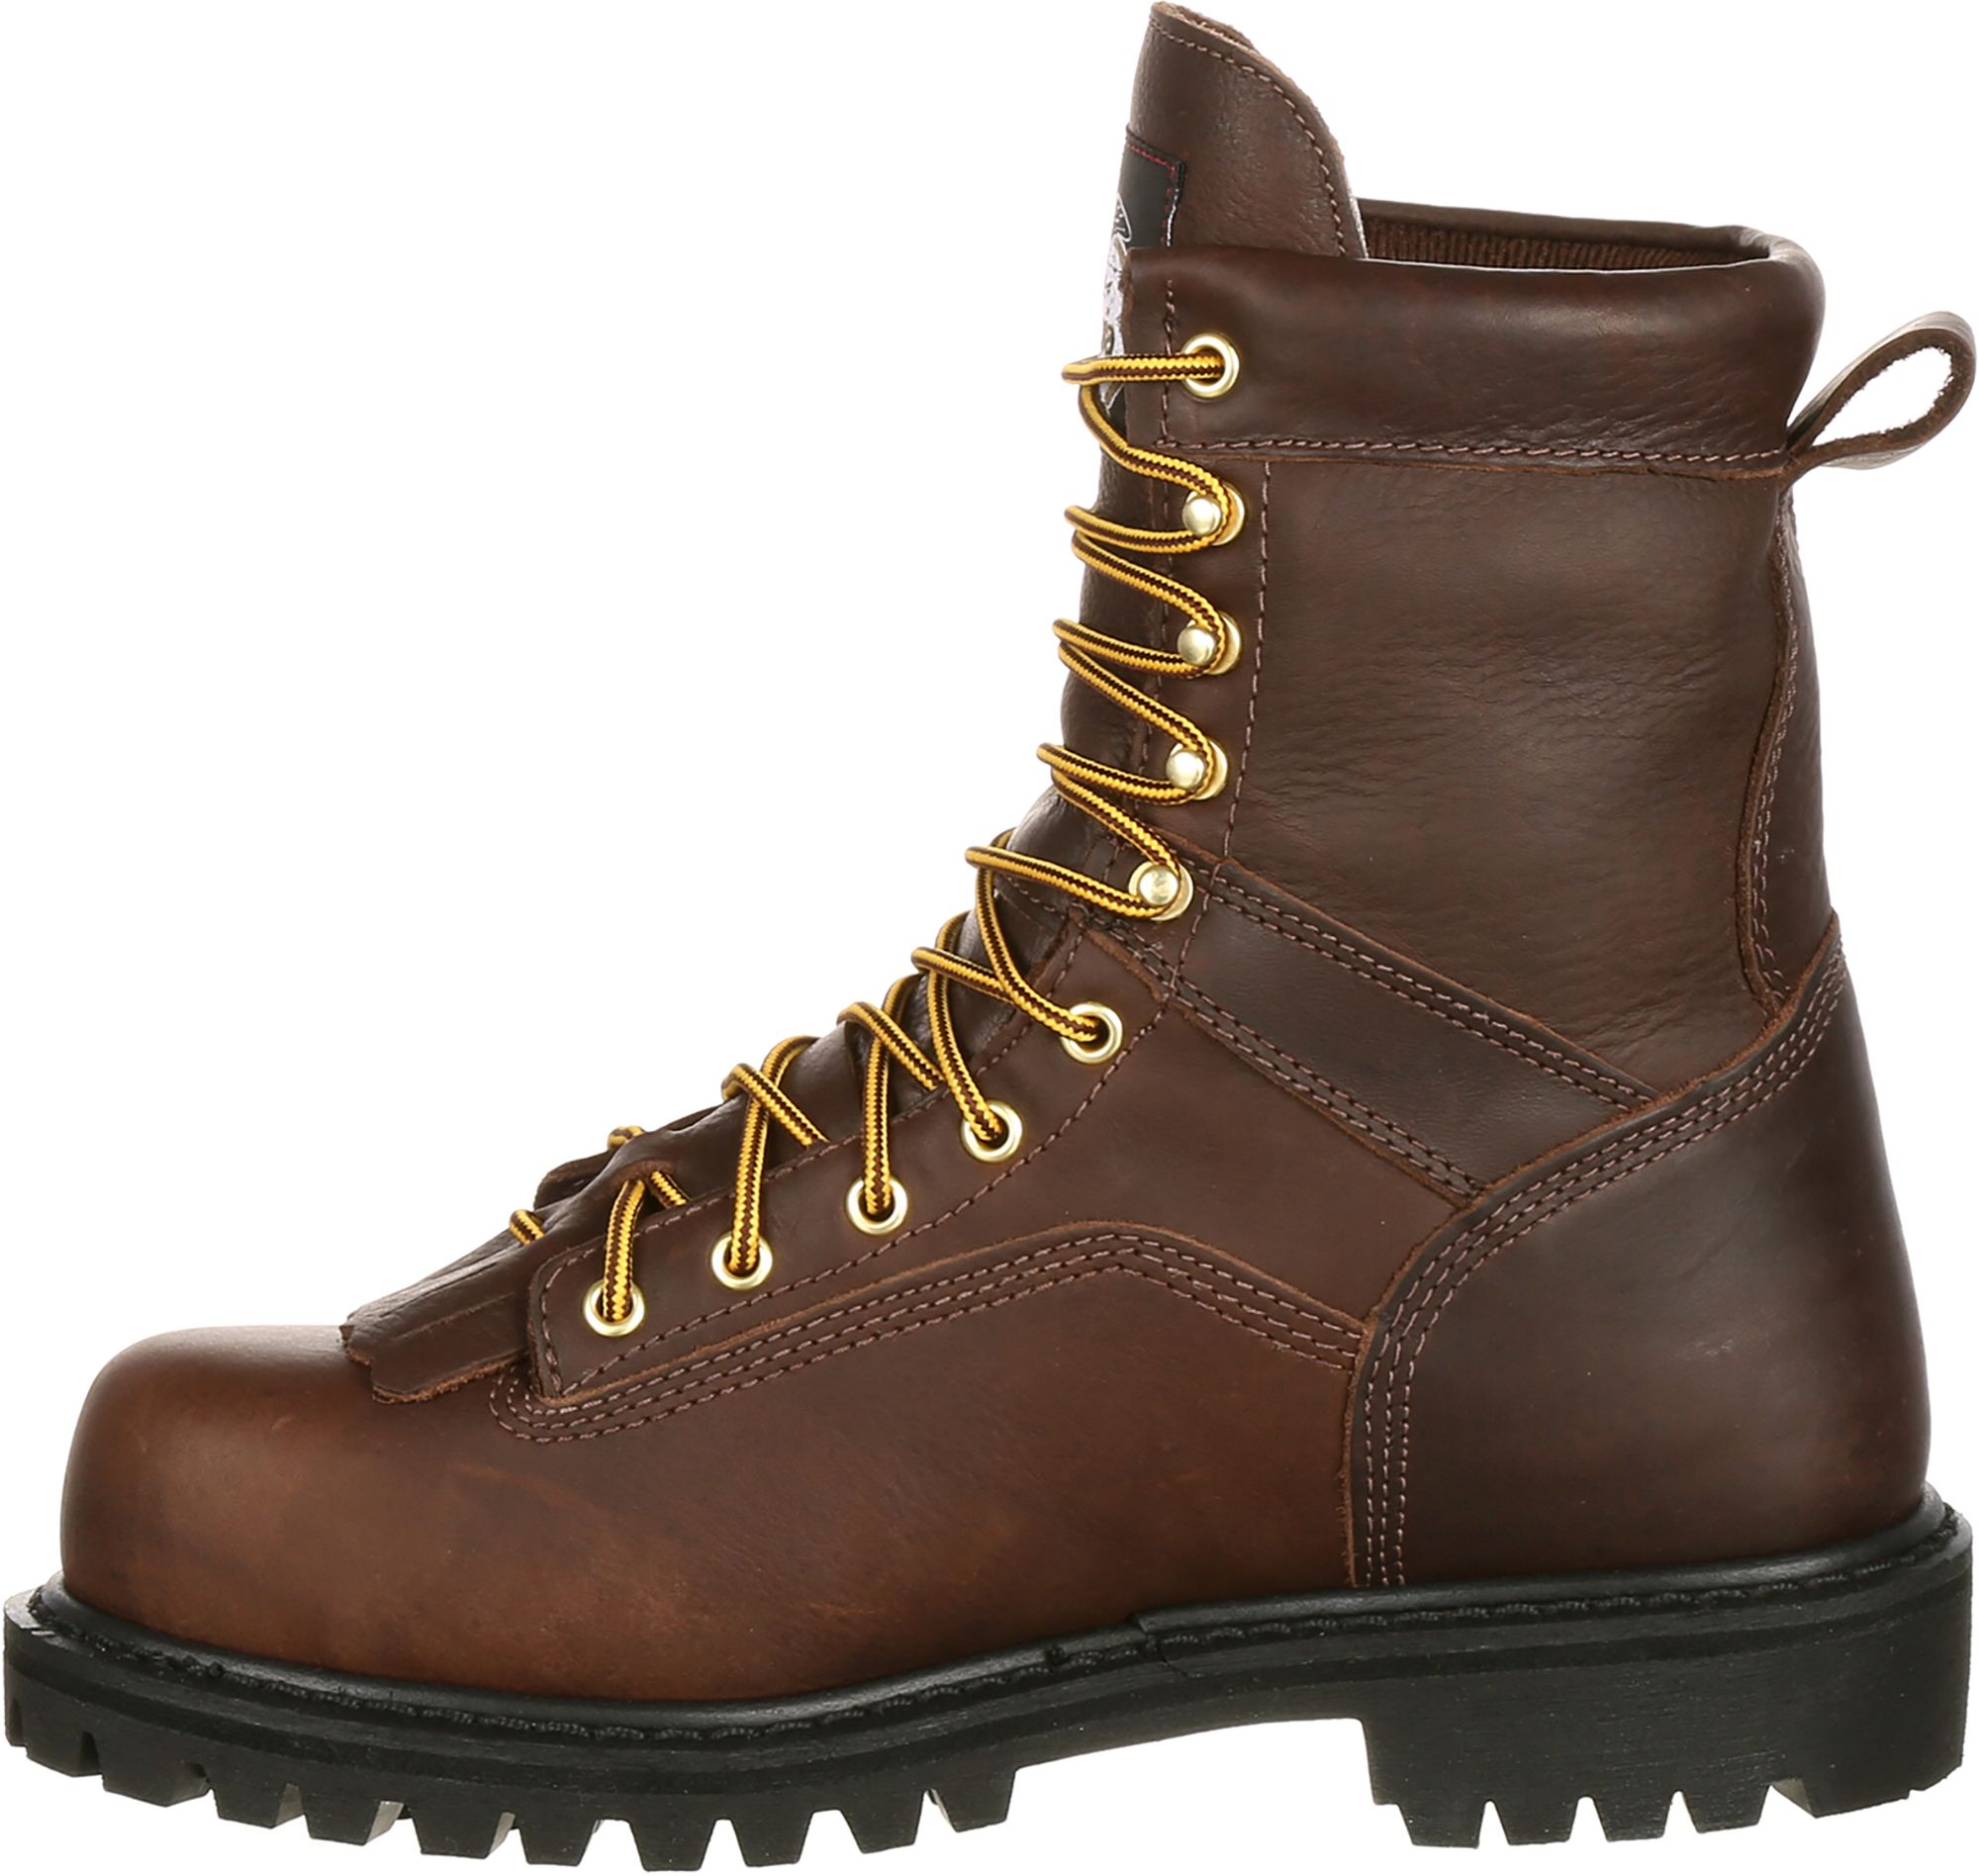 lace to toe steel toe boots